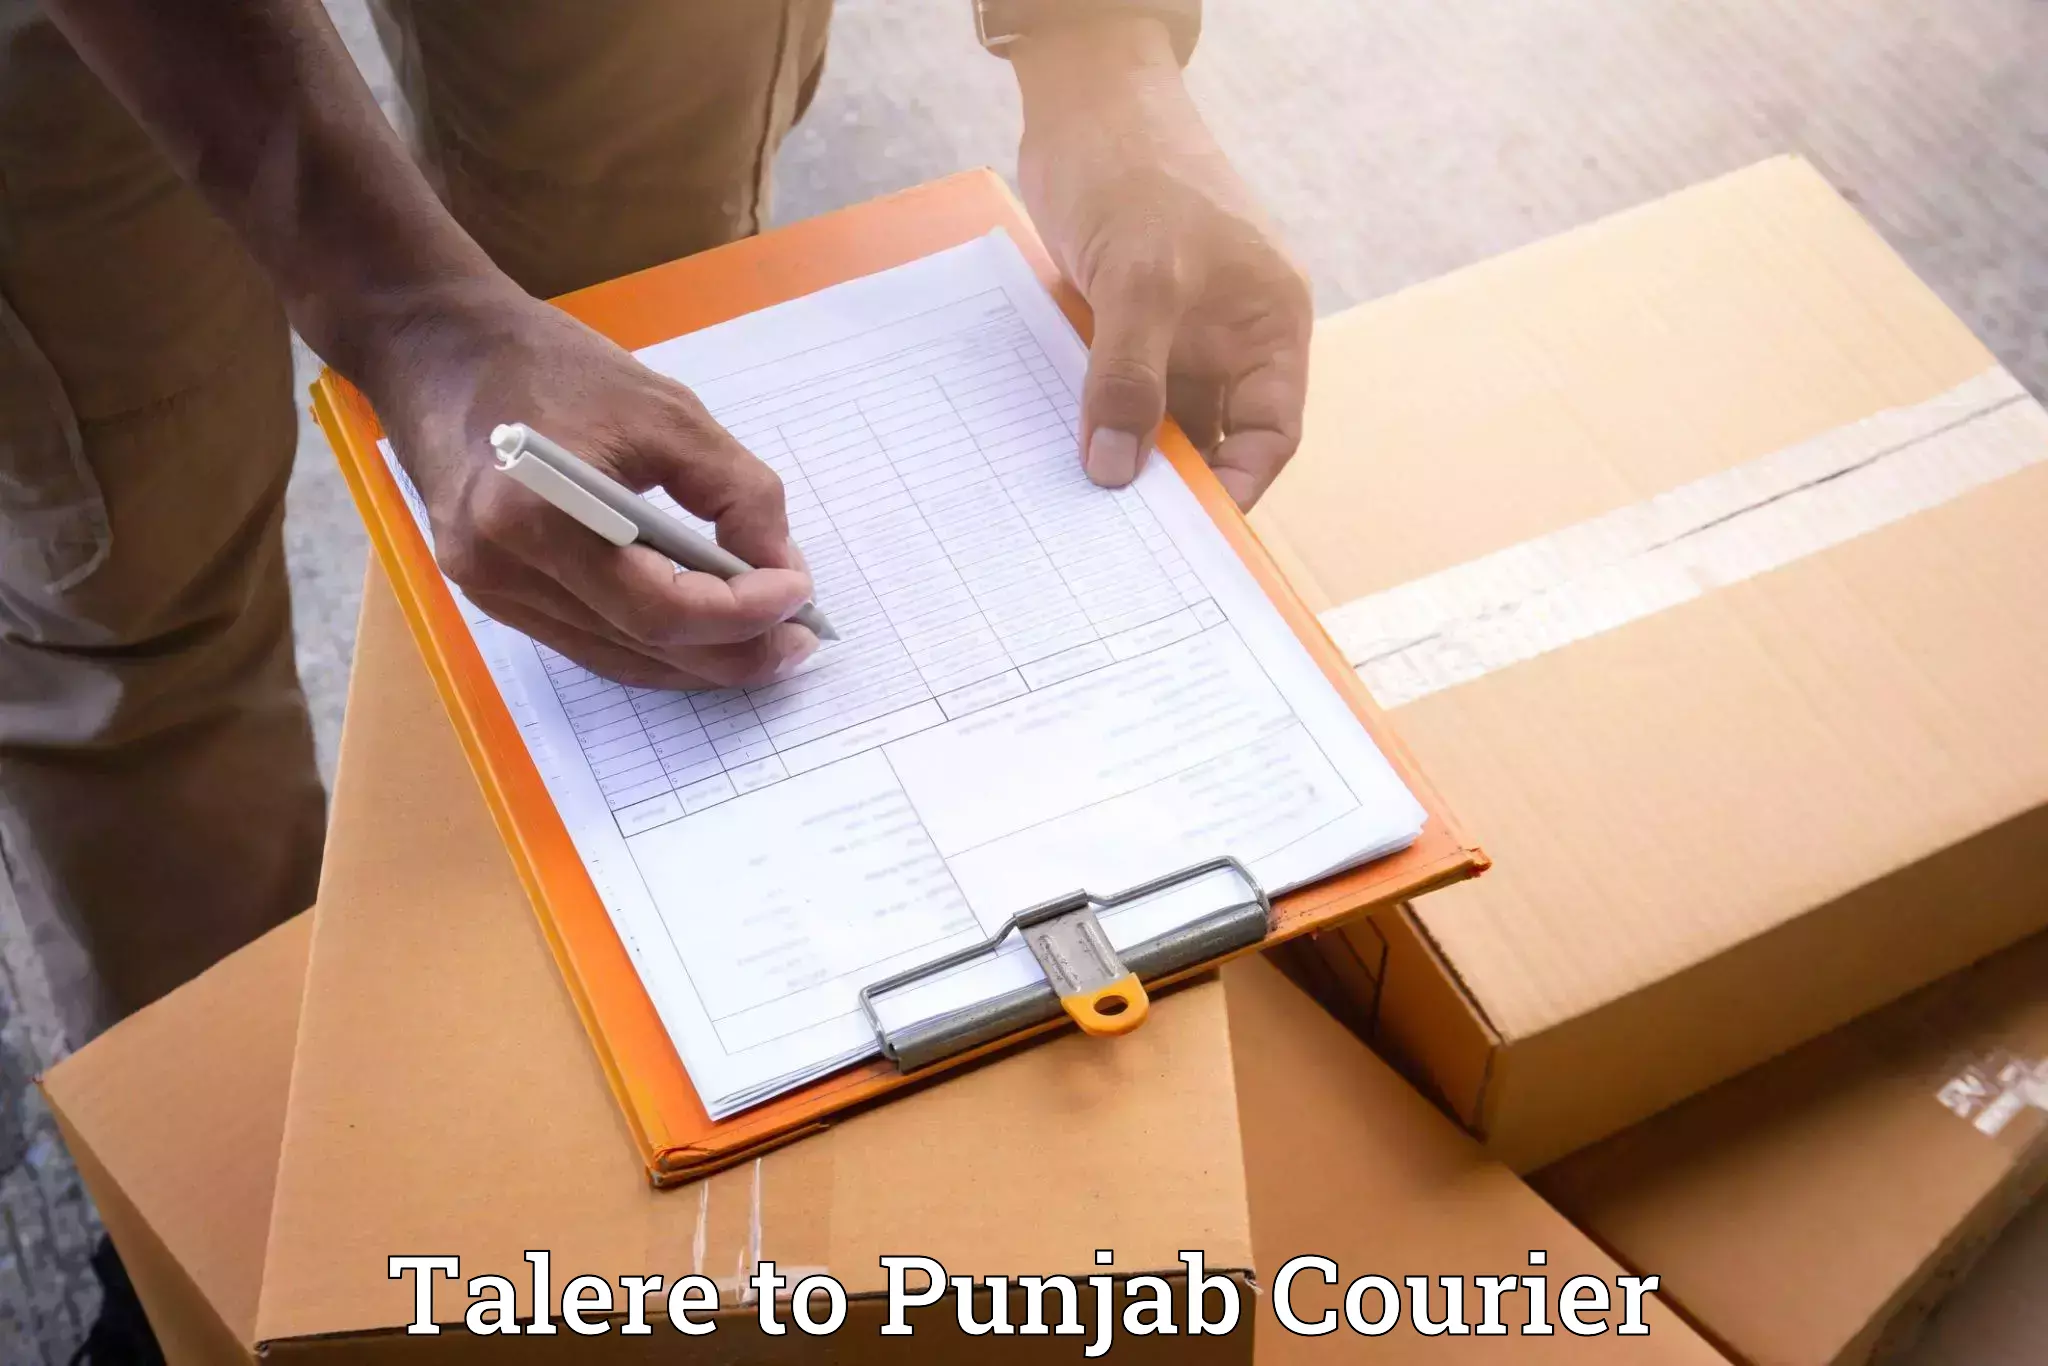 Furniture moving specialists Talere to Punjab